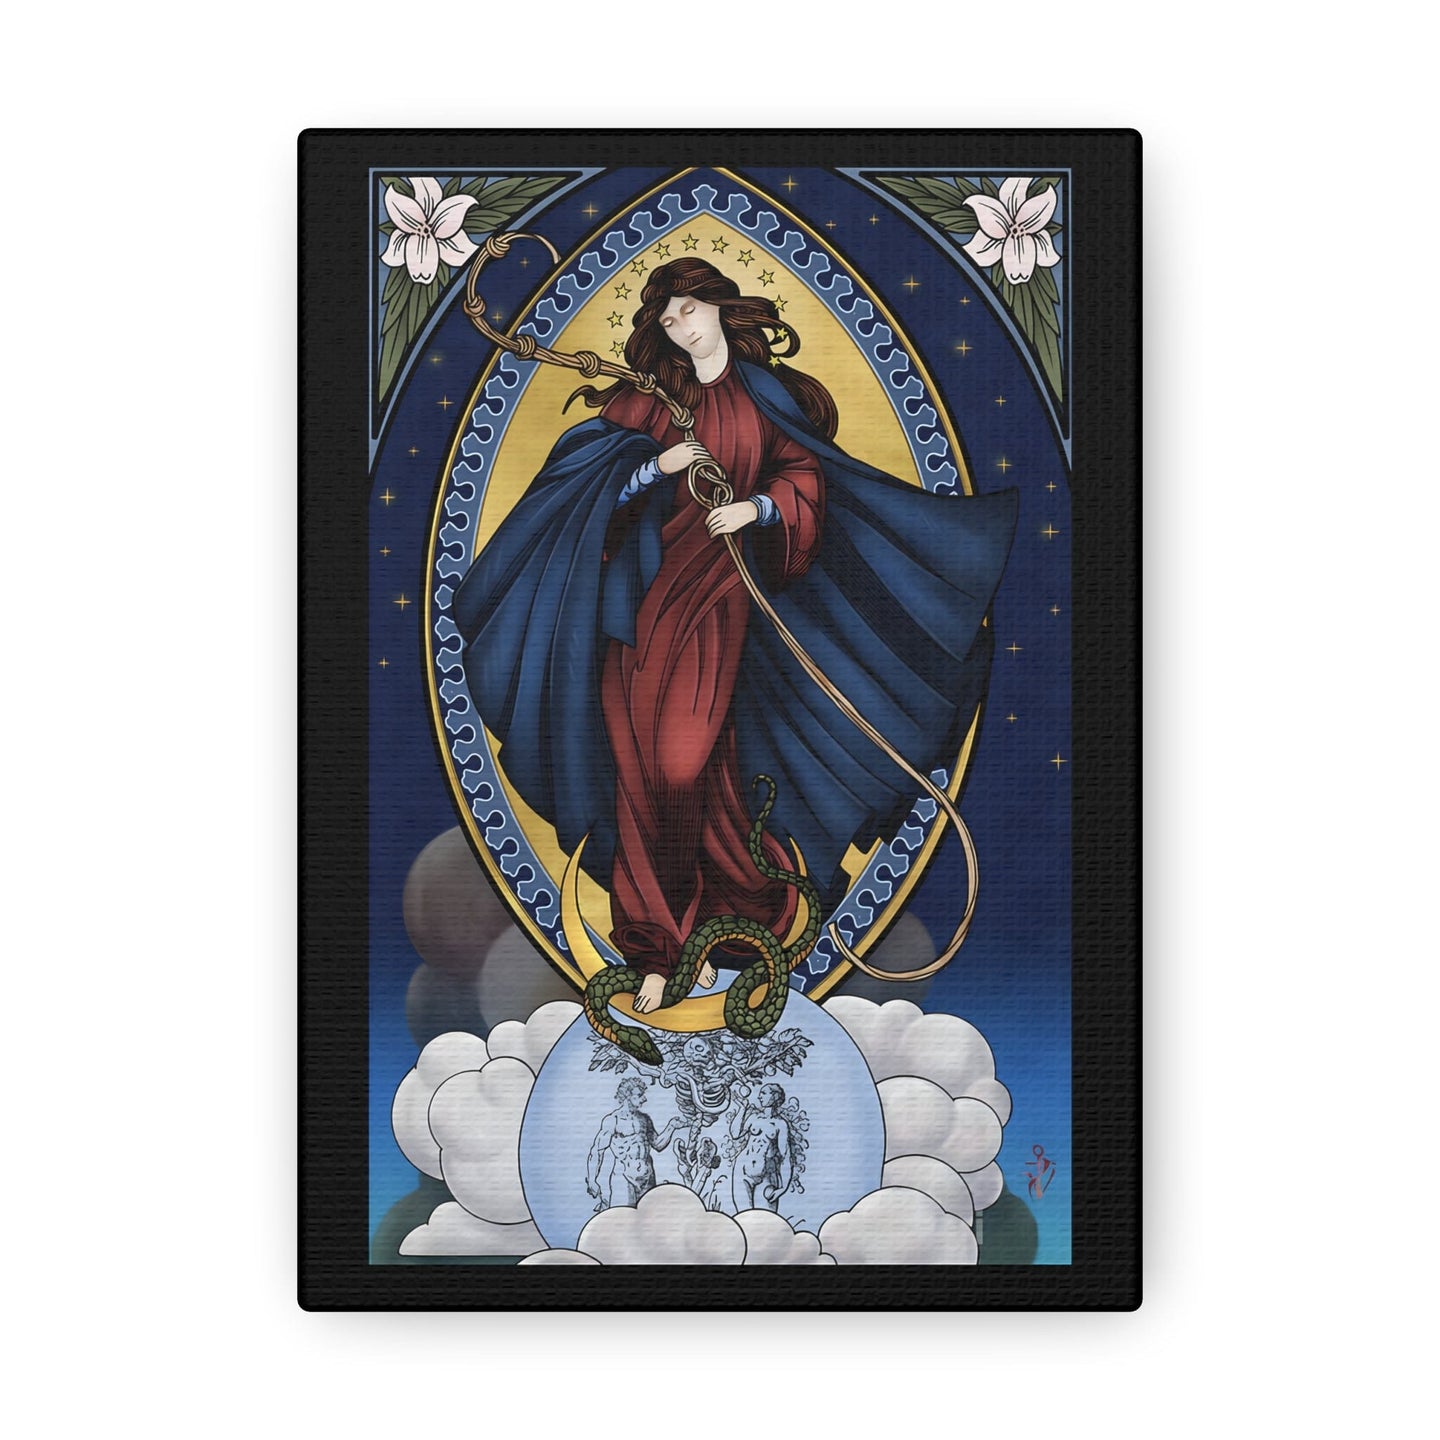 Mary Untier of Knots Premium Canvas Wall Print